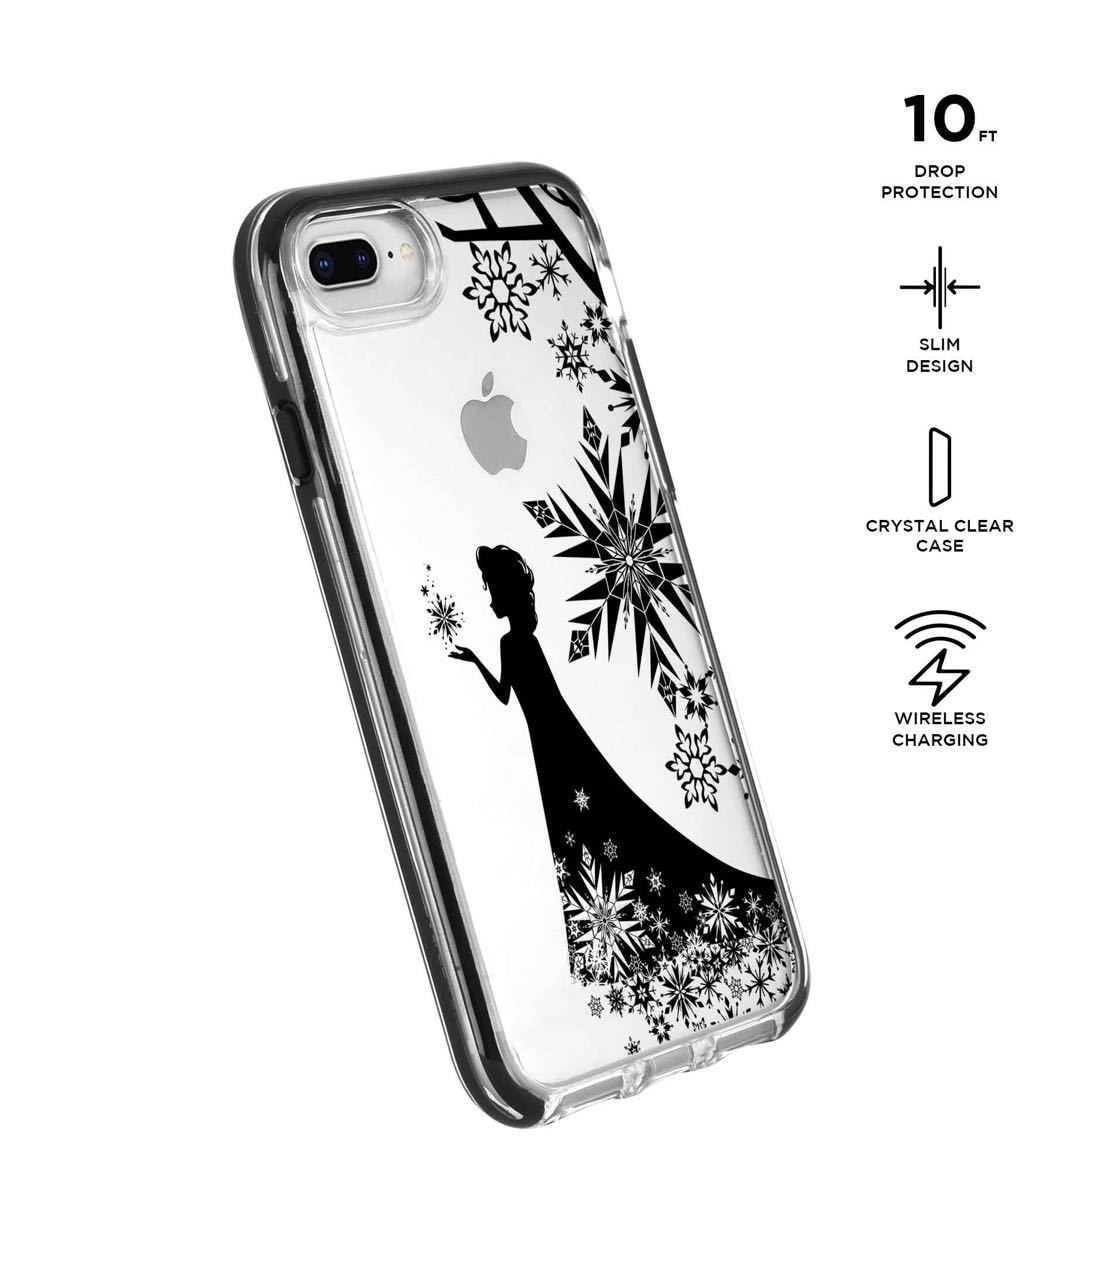 Elsa Silhouette - Extreme Phone Case for iPhone 8 Plus